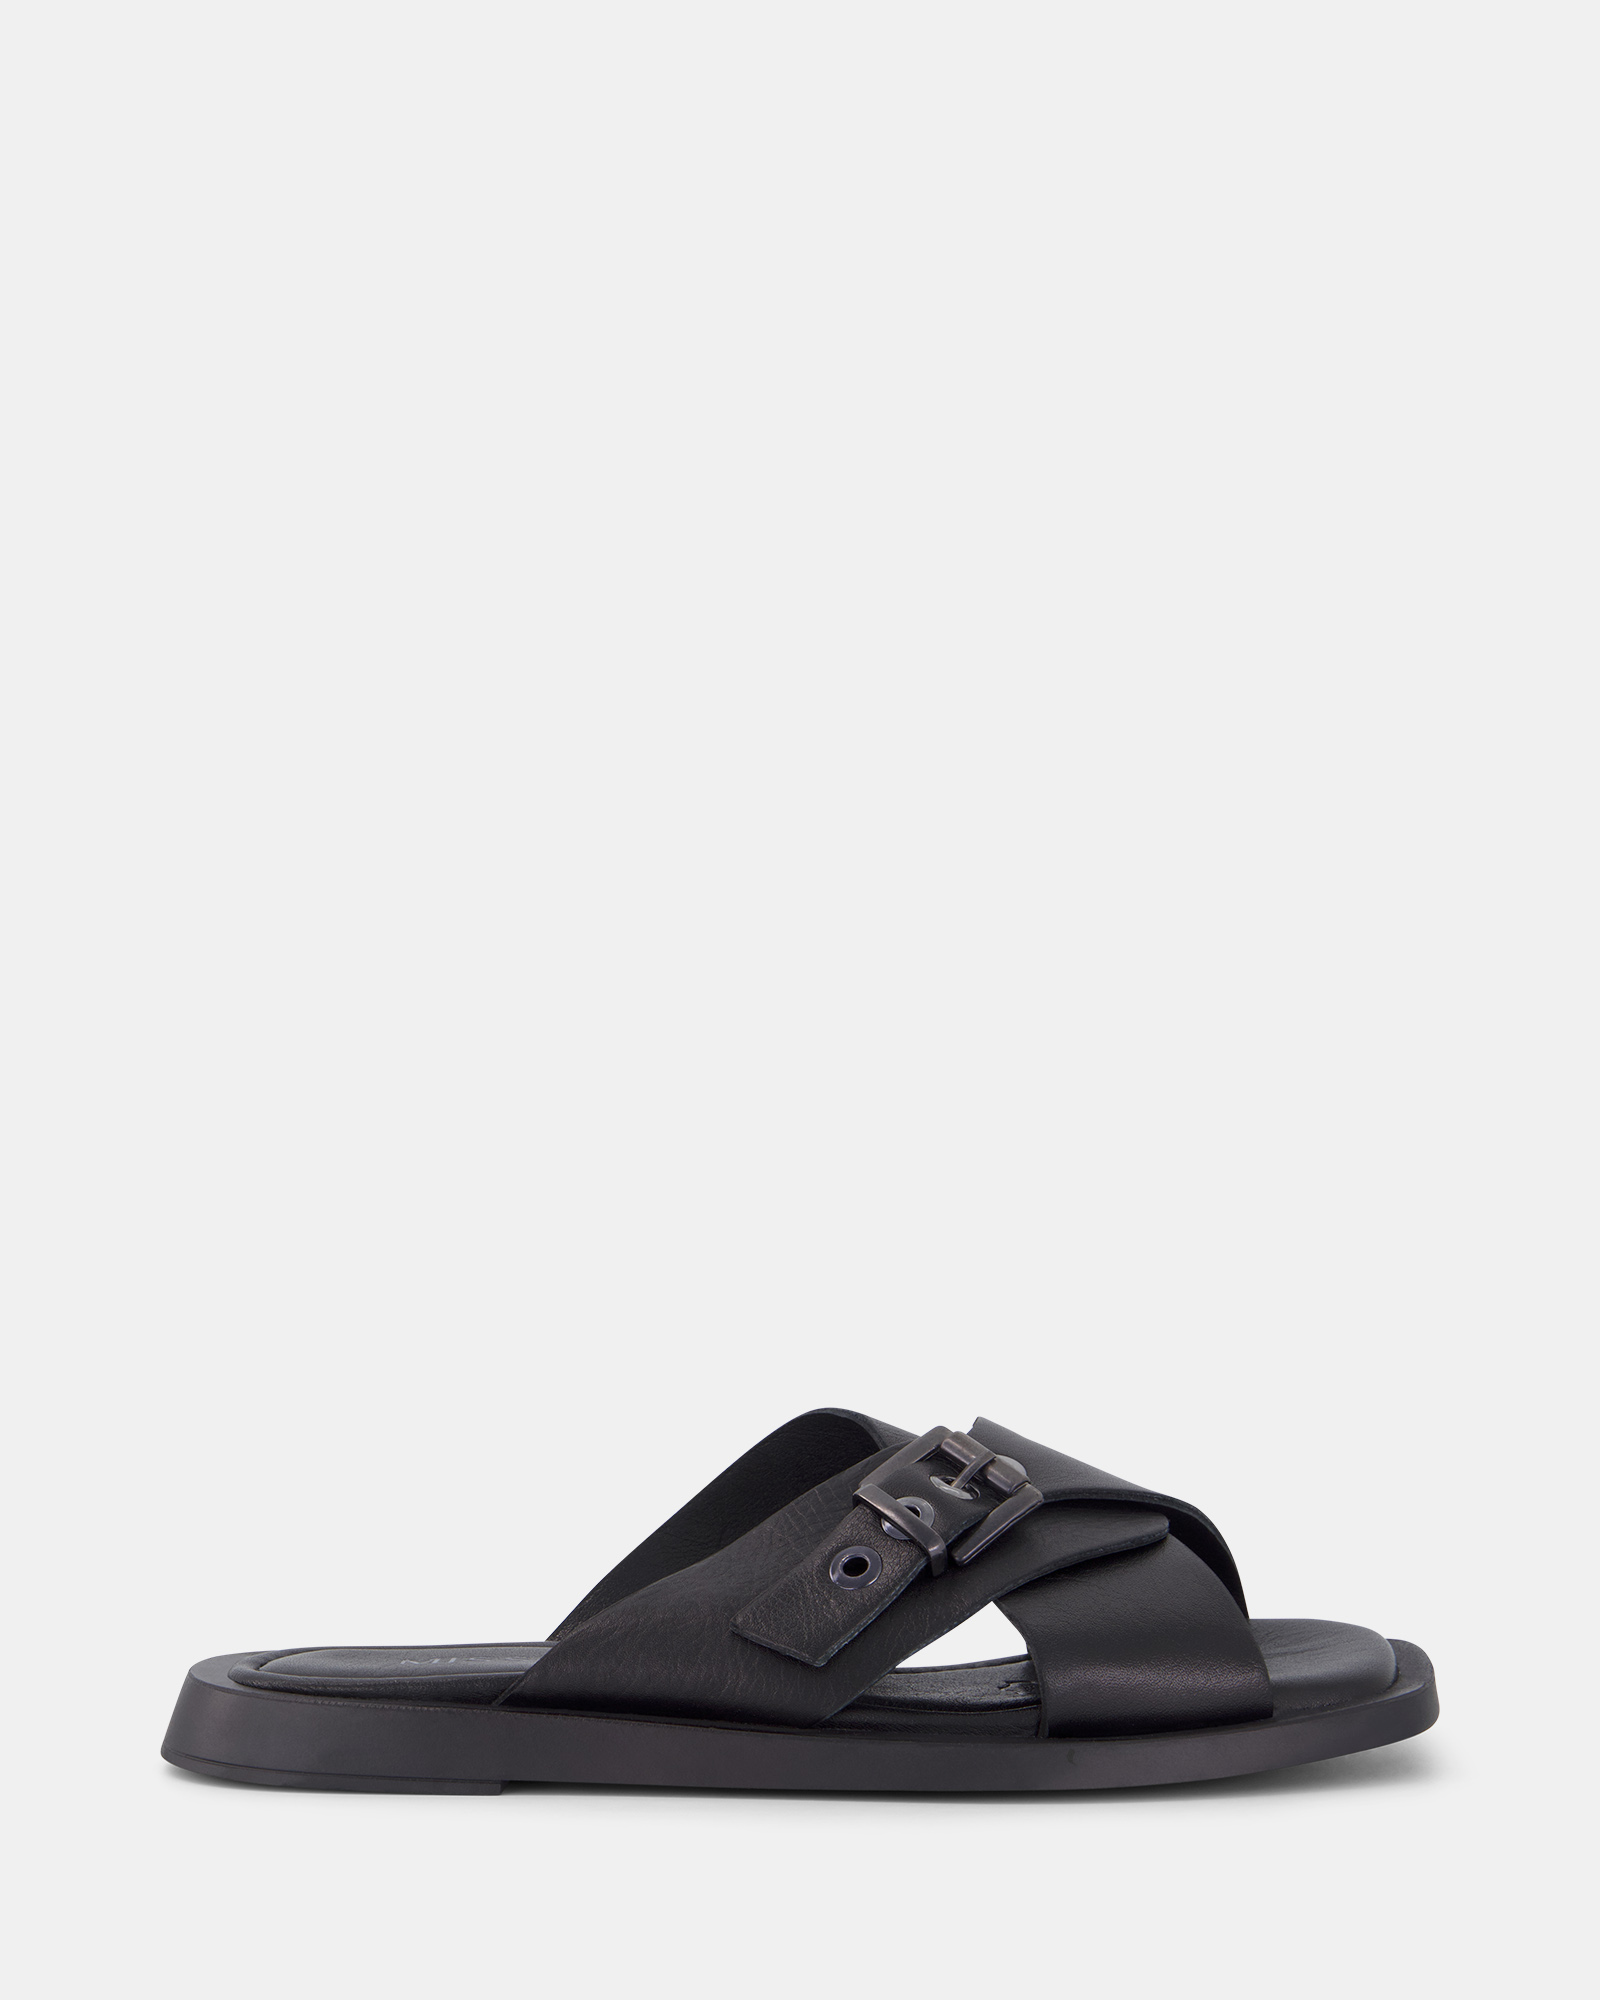 Buy CYBILL Black sandals Online at Shoe Connection